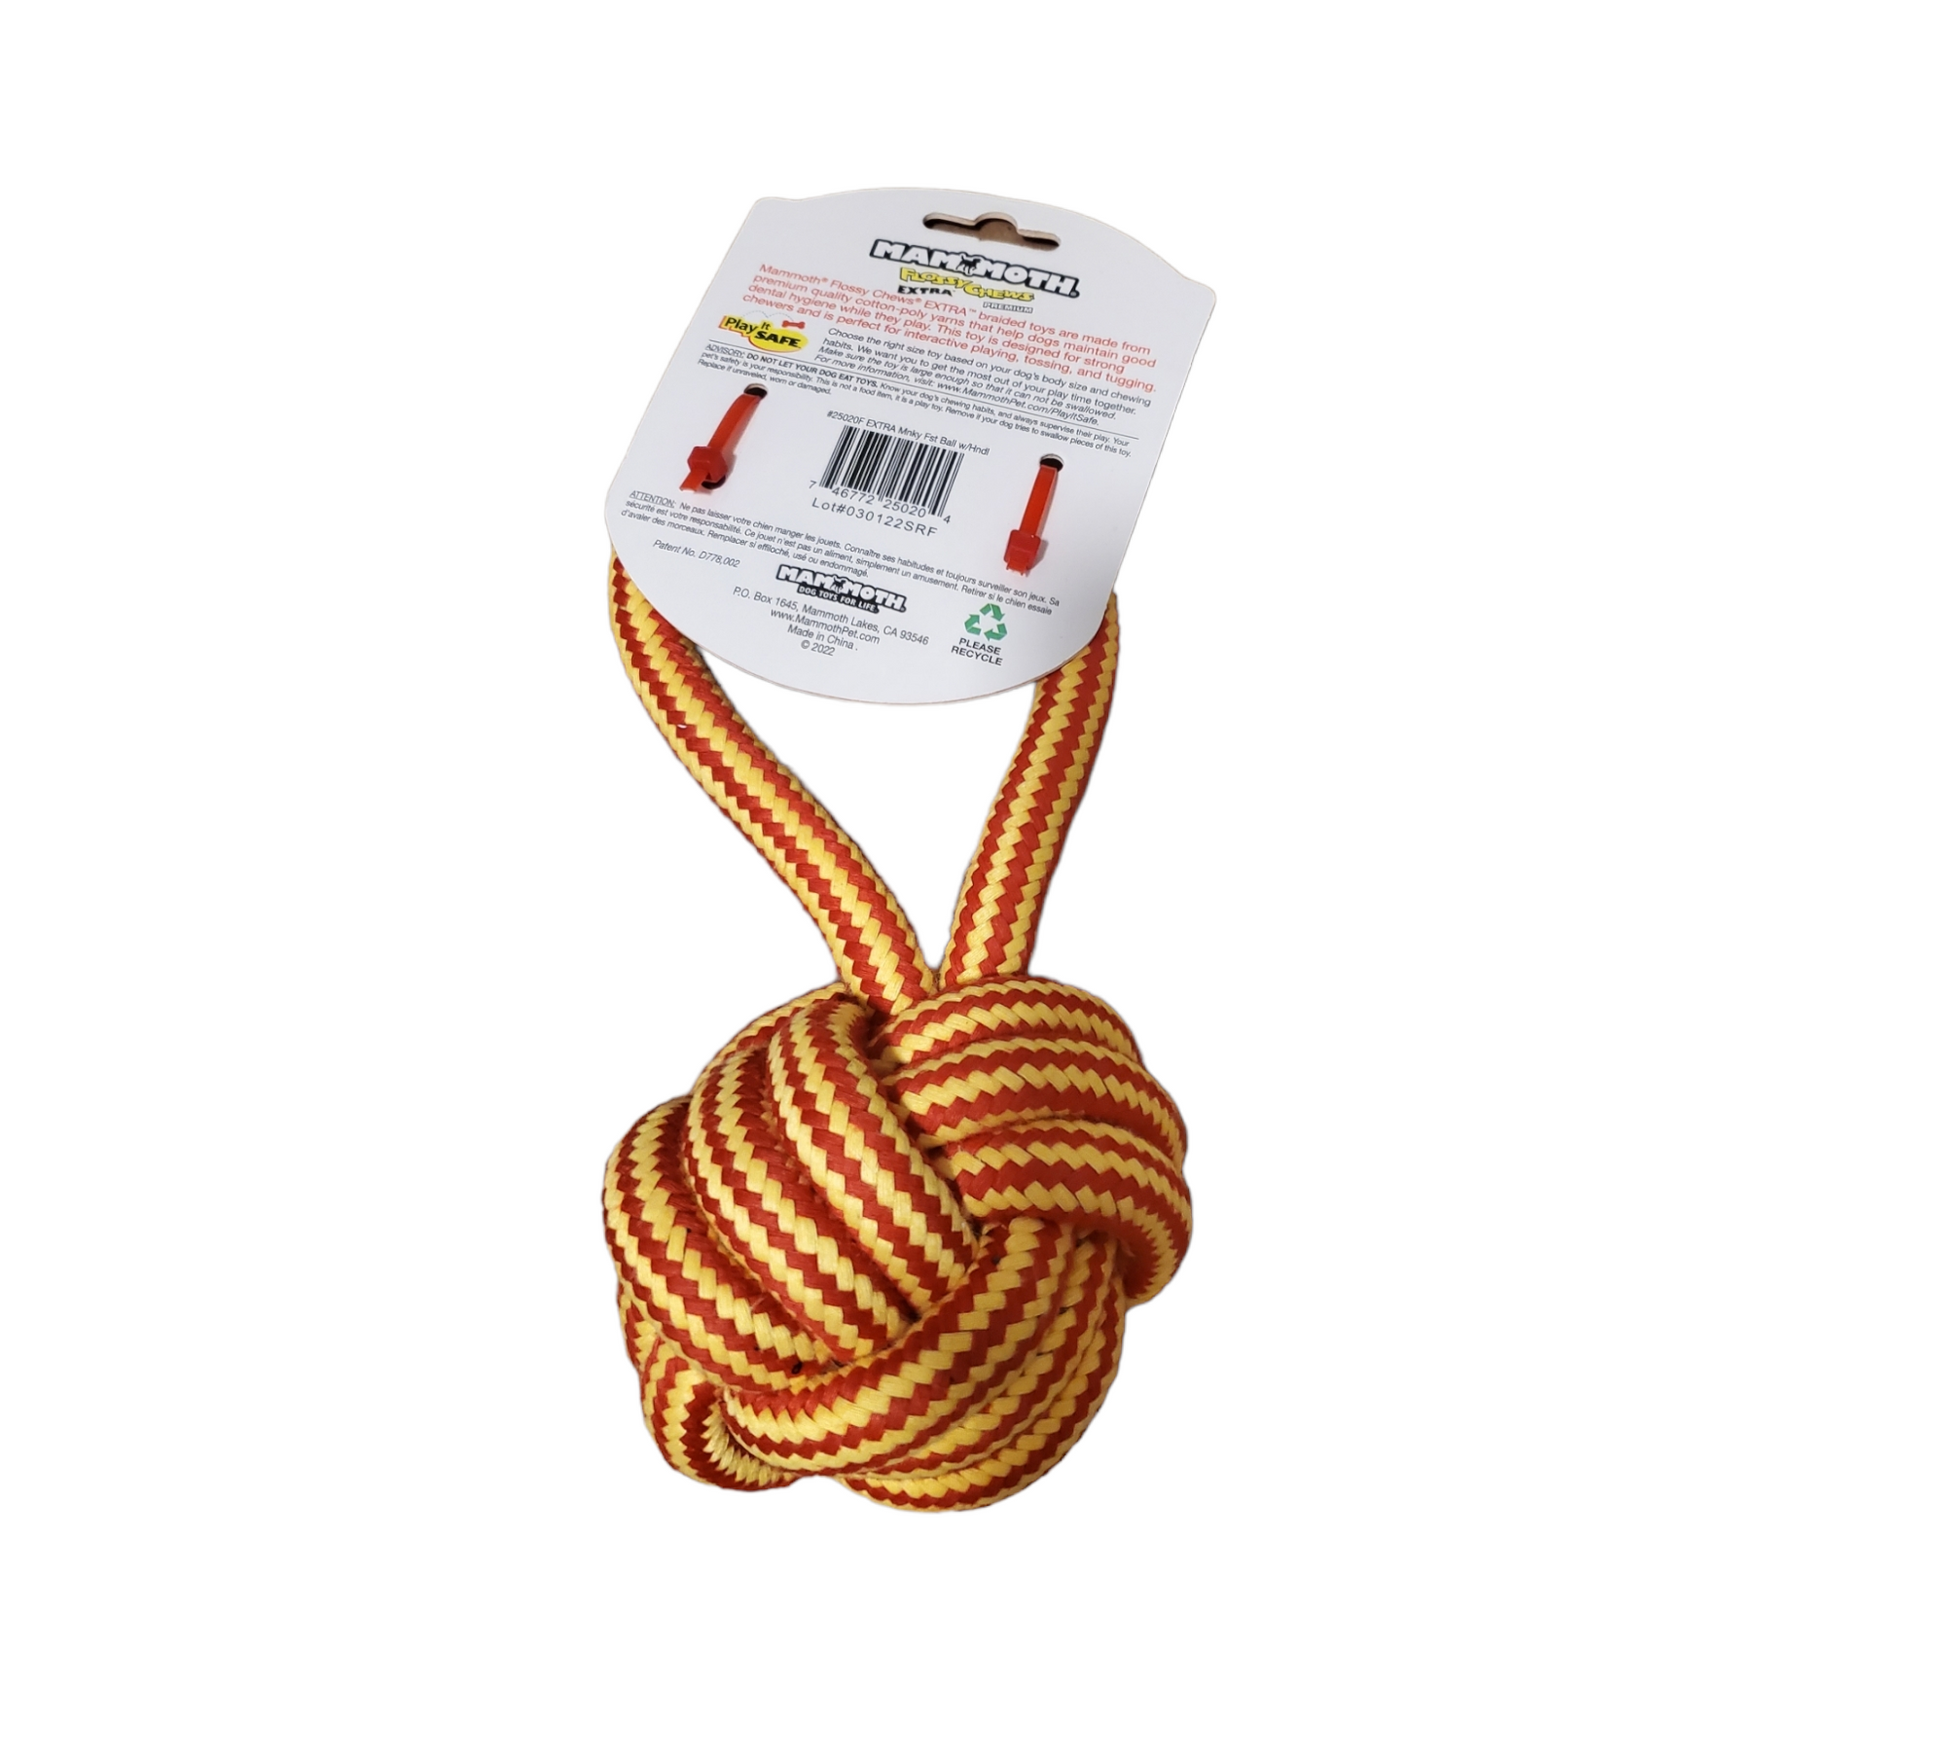 Canine's World Dog Rope & Tug Toys Mammoth Flossy Chews Extra Monkey Fist Ball with Handle, Mammoth